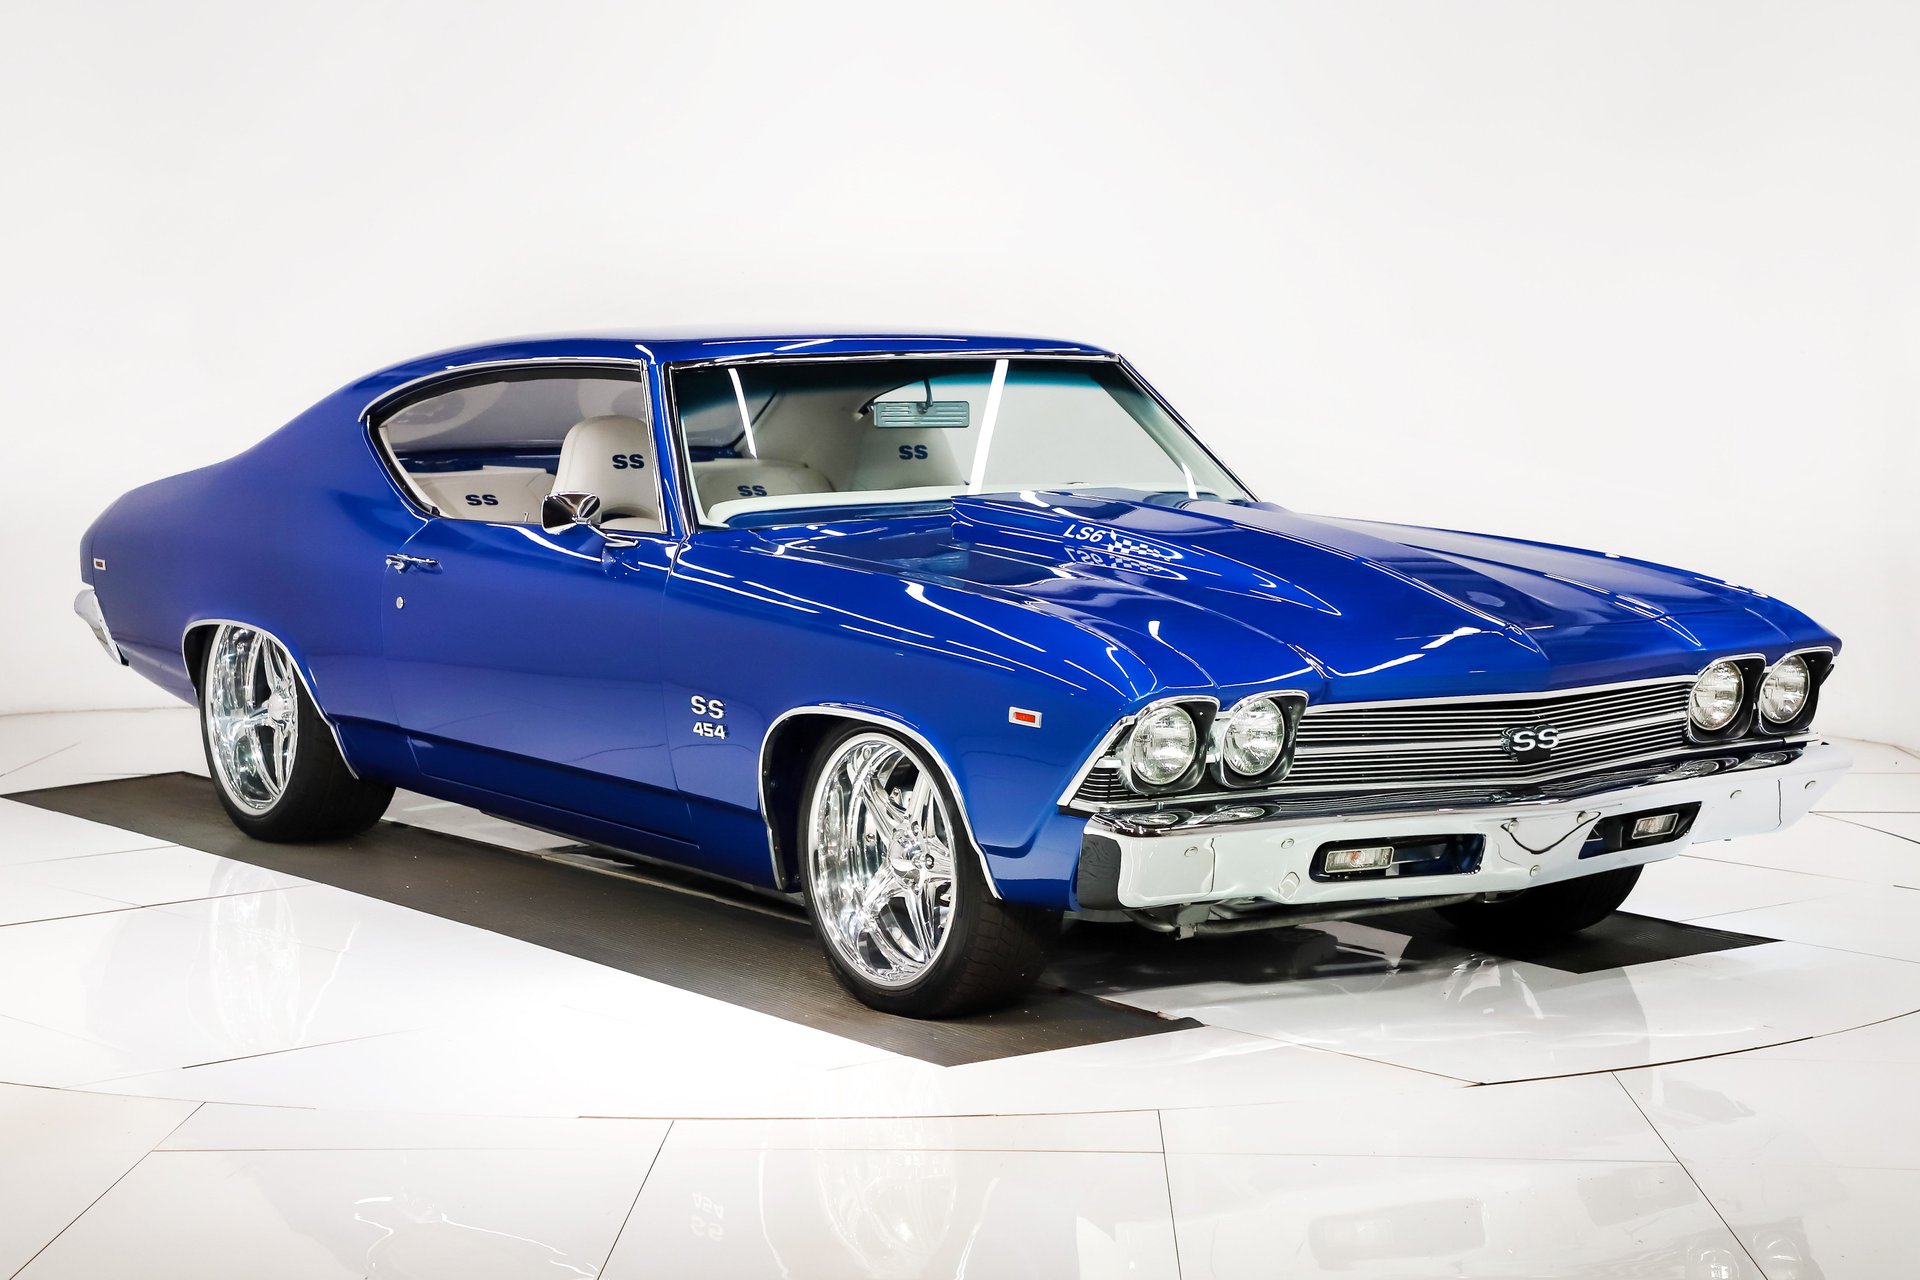 1969 Chevrolet Chevelle: A High-End Show Car that’s Simply Awesome to Drive!